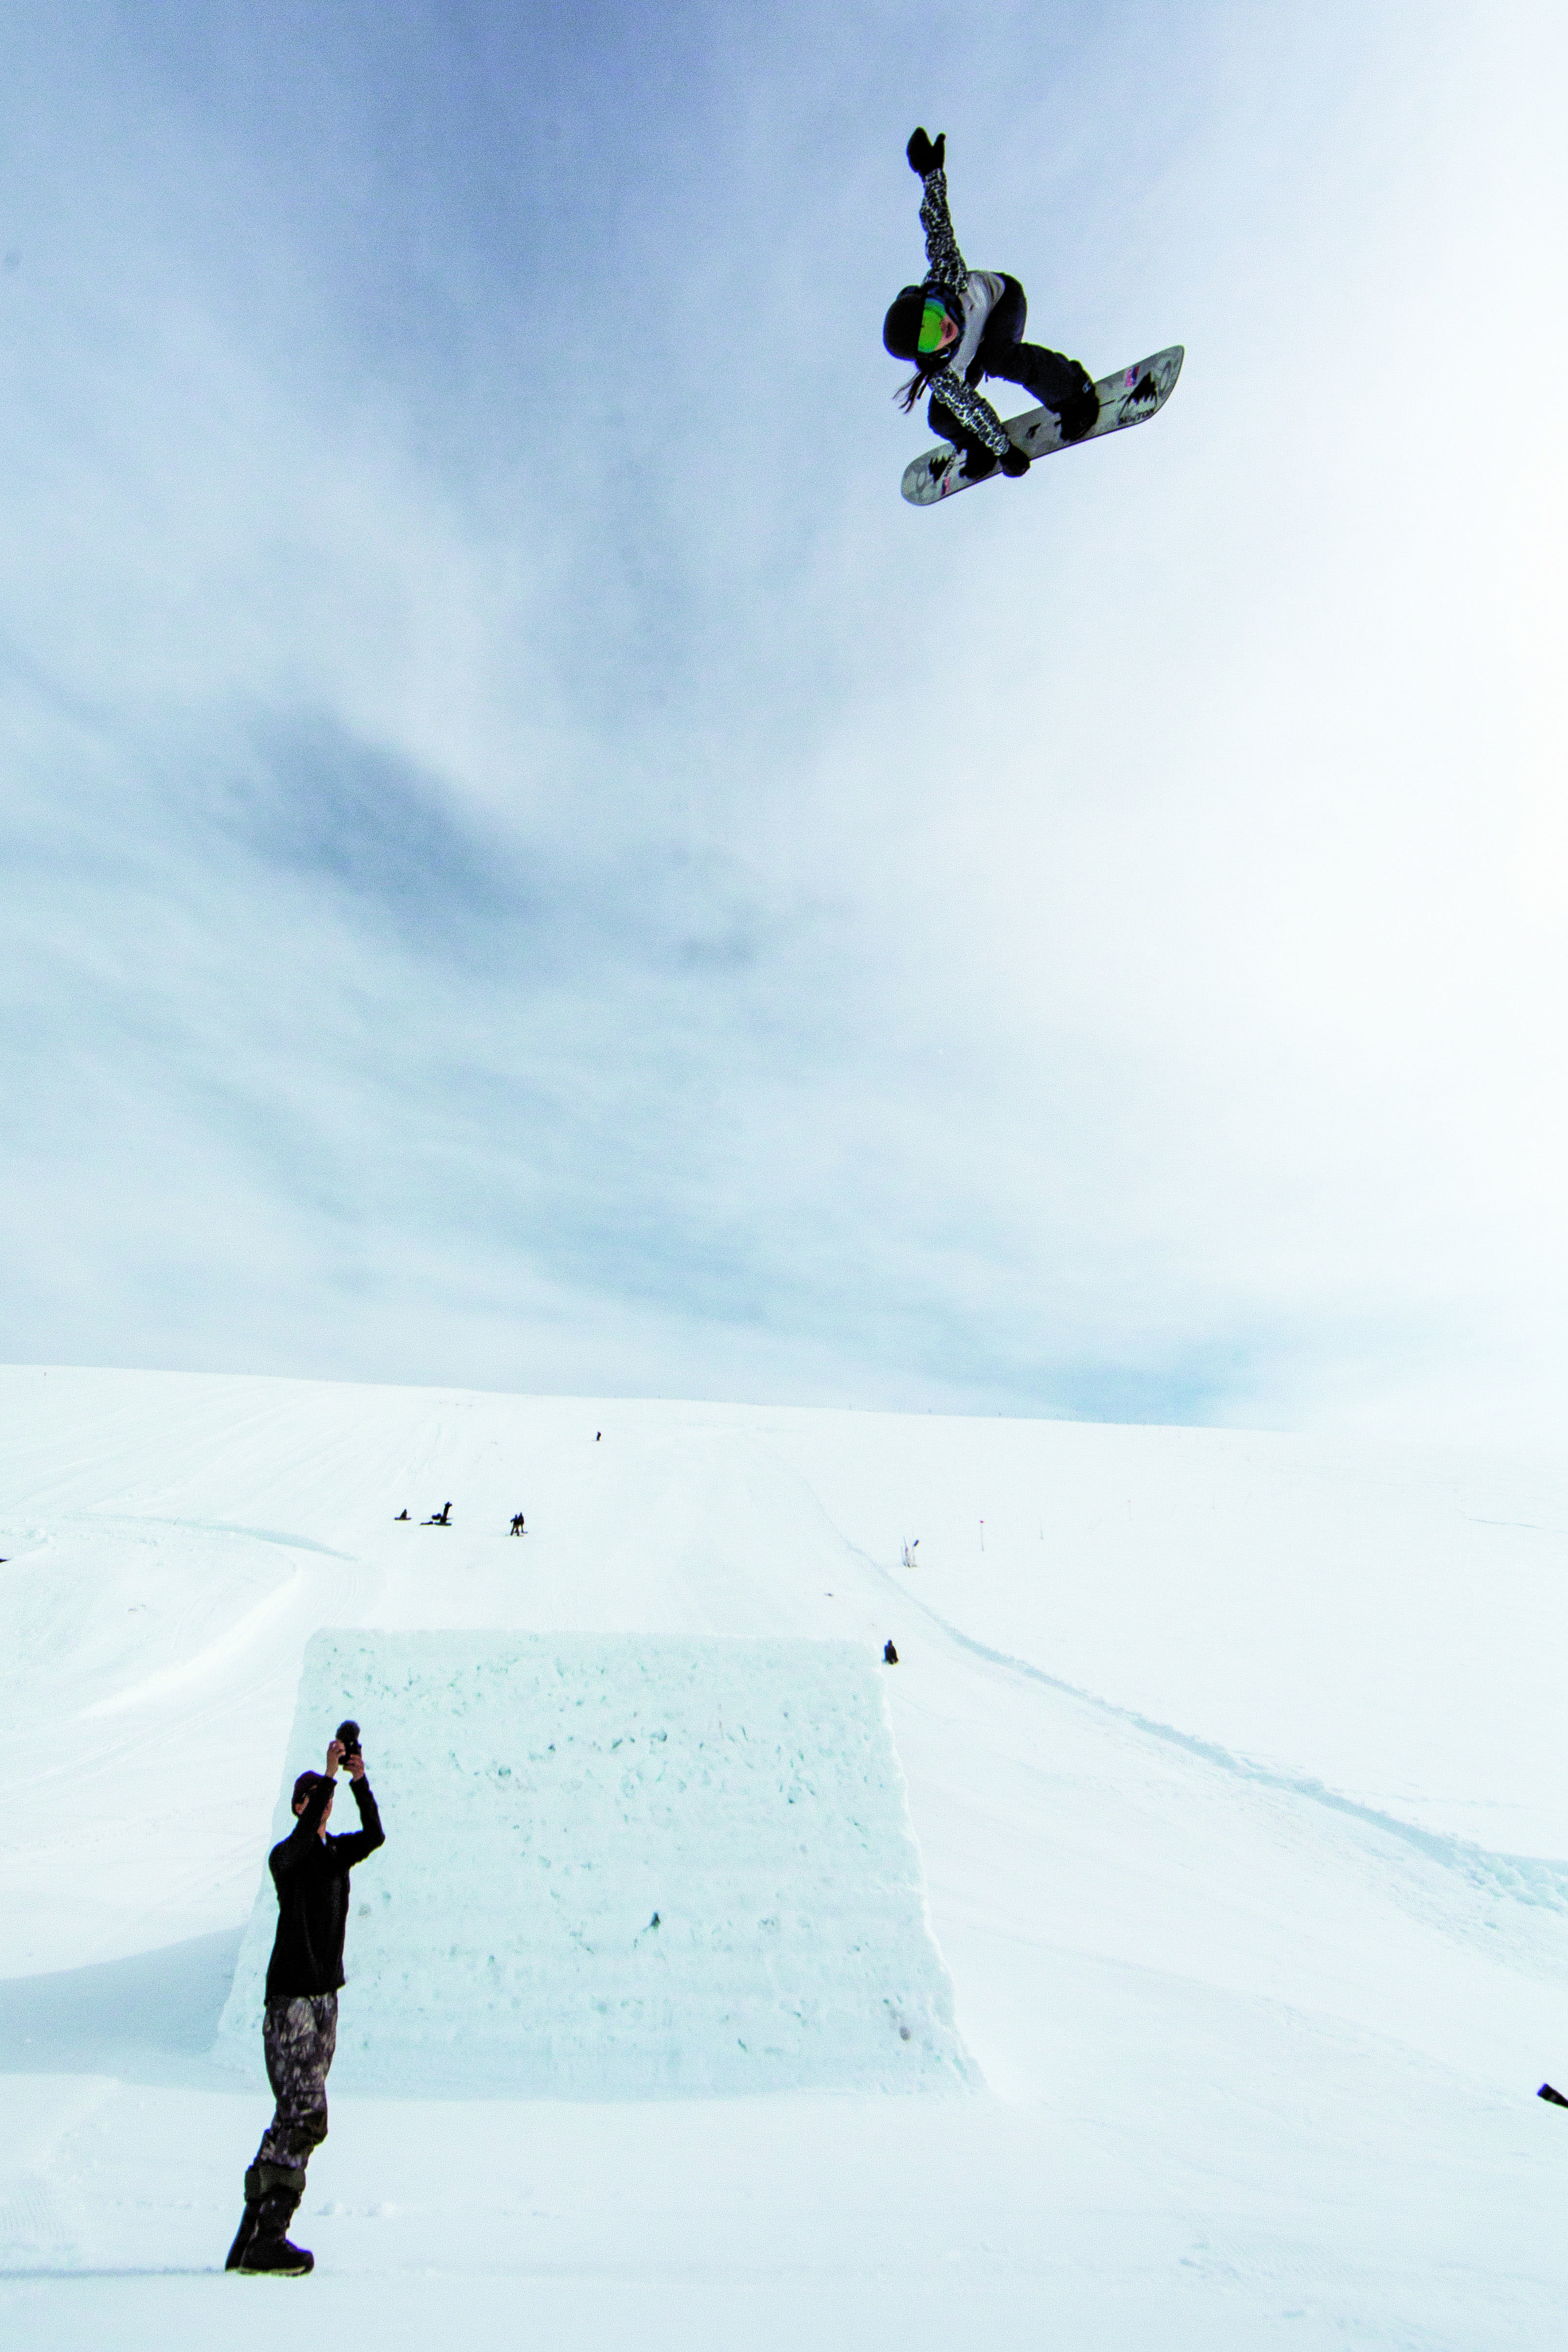 A piece full of self-confidence and fun that jumped out of the lip vigorously.In an environment of jump sessions different from the competition, express your own snowboarding Location: Canada, AB, Sunshine Village VIEWS FROM THE VILLAGE Photo: Erin Hogue